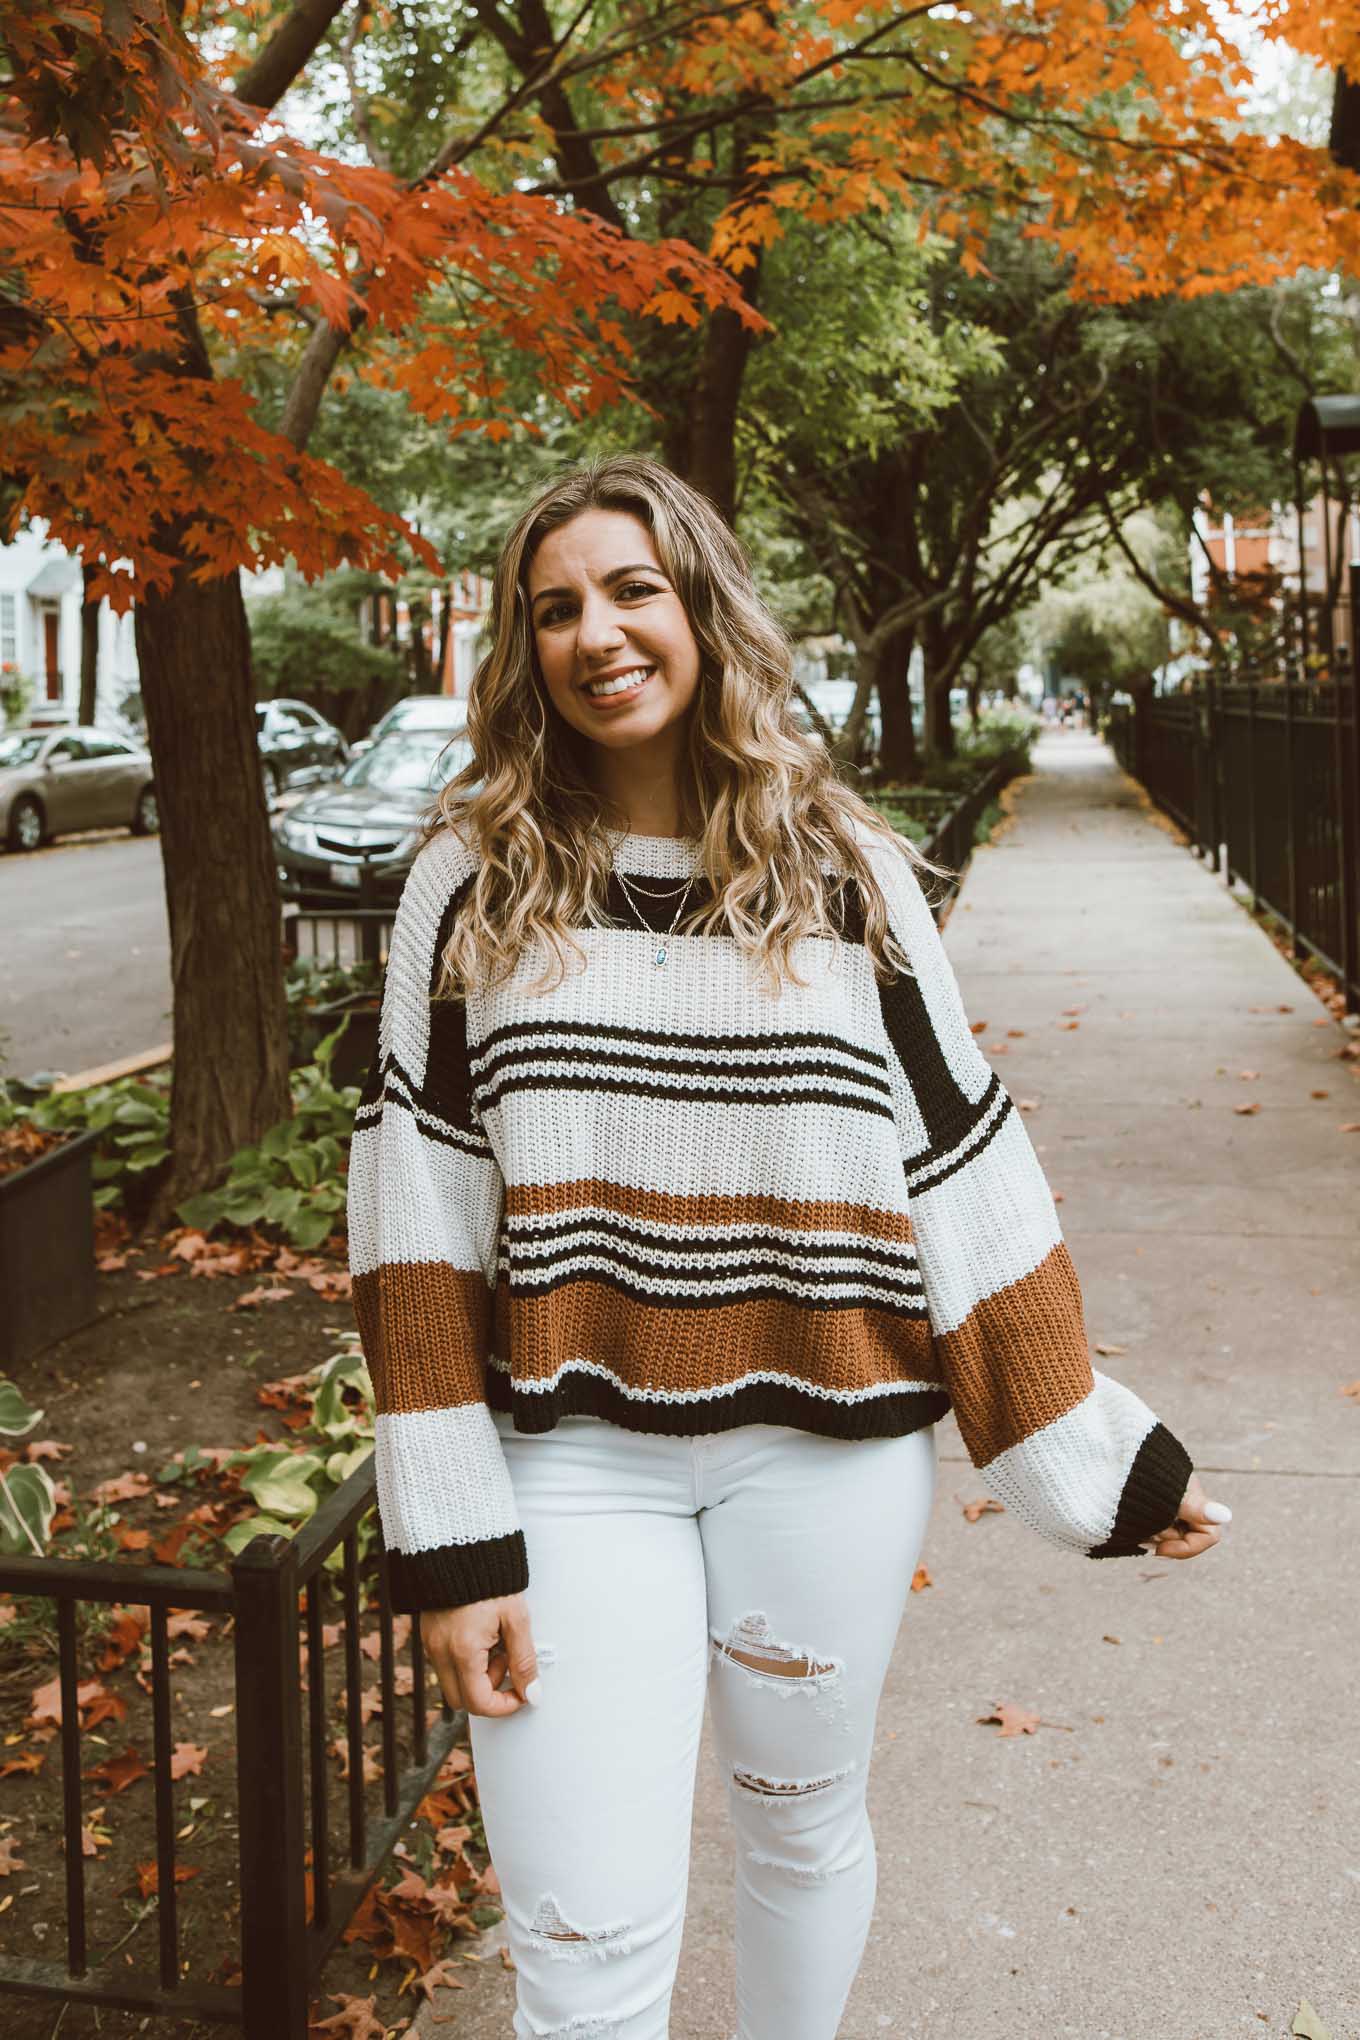 Fall Sweaters by popular Chicago fashion blog, Glass of Glam: image of a woman standing under a tree with orange leaves and wearing a Amazon ZESICA Women's Long Sleeve Crew Neck Striped Color Block Casual Loose Knitted Pullover Sweater, Old Navy Mid-Rise Distressed Rockstar Super Skinny White Ankle Jeans for Women, Gucci Gucci Jordaan GG canvas loafer, and Kendra Scott Elisa Gold Triple Strand Necklace In Abalone Shell.